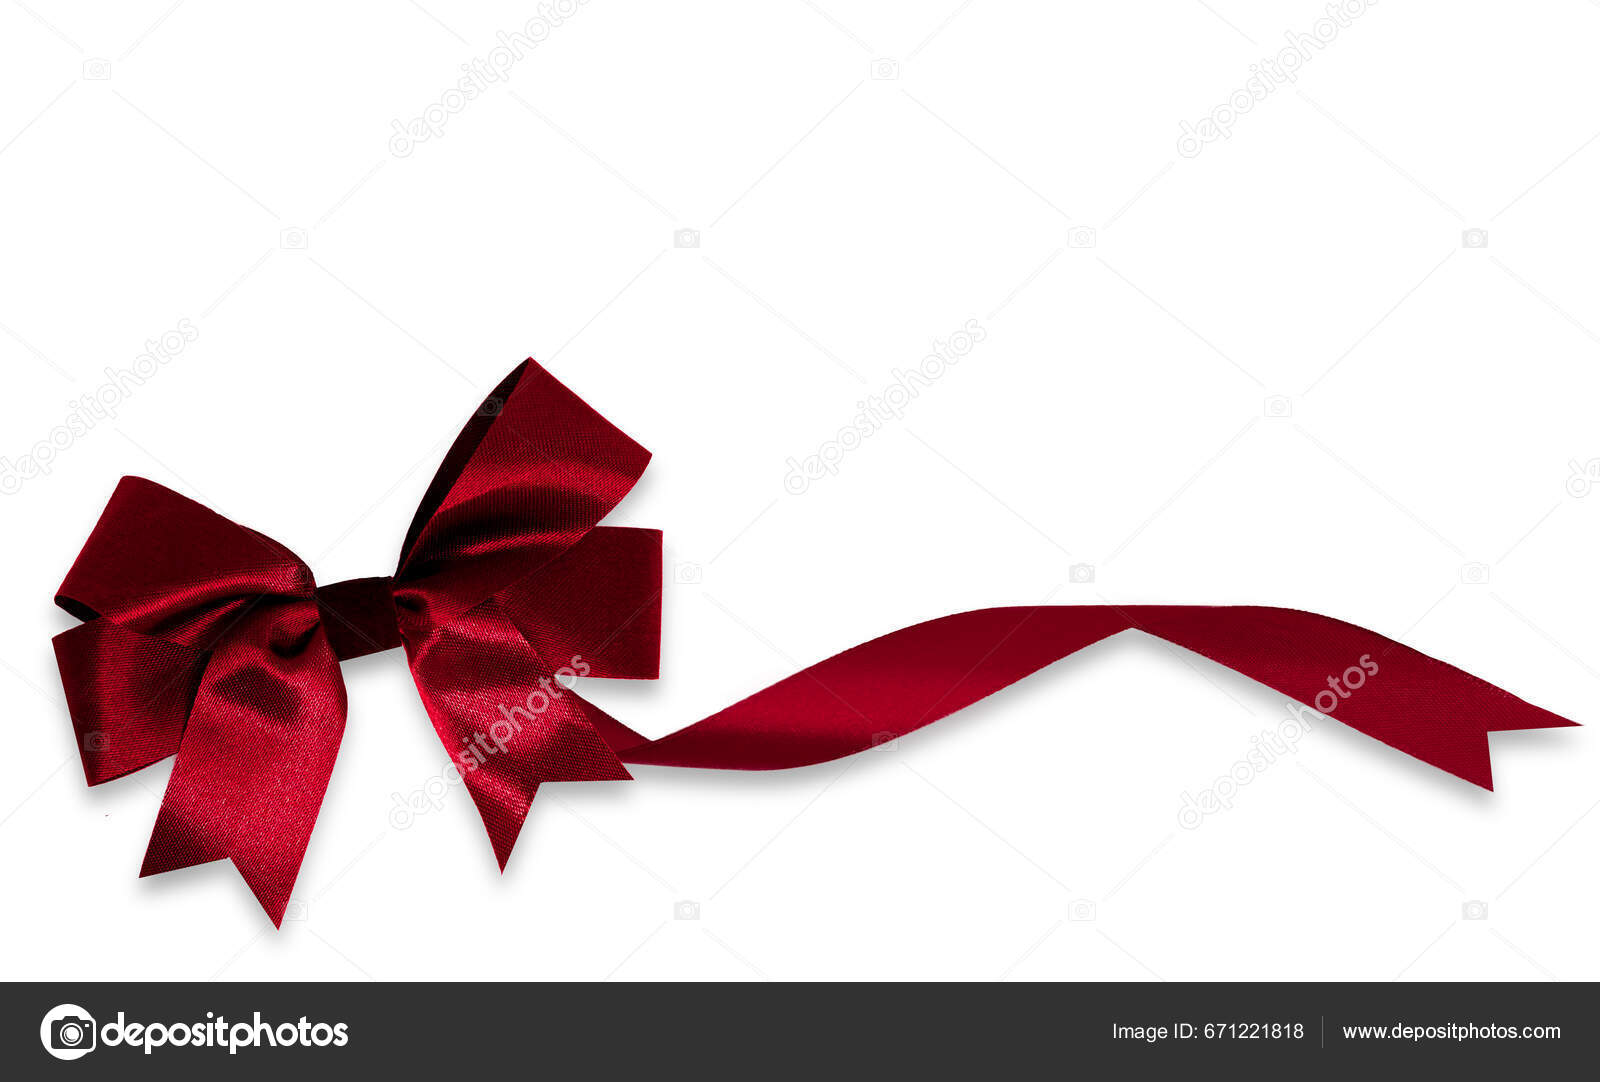 Big Green And Red Bows For Gift Wrapping Isolated On White